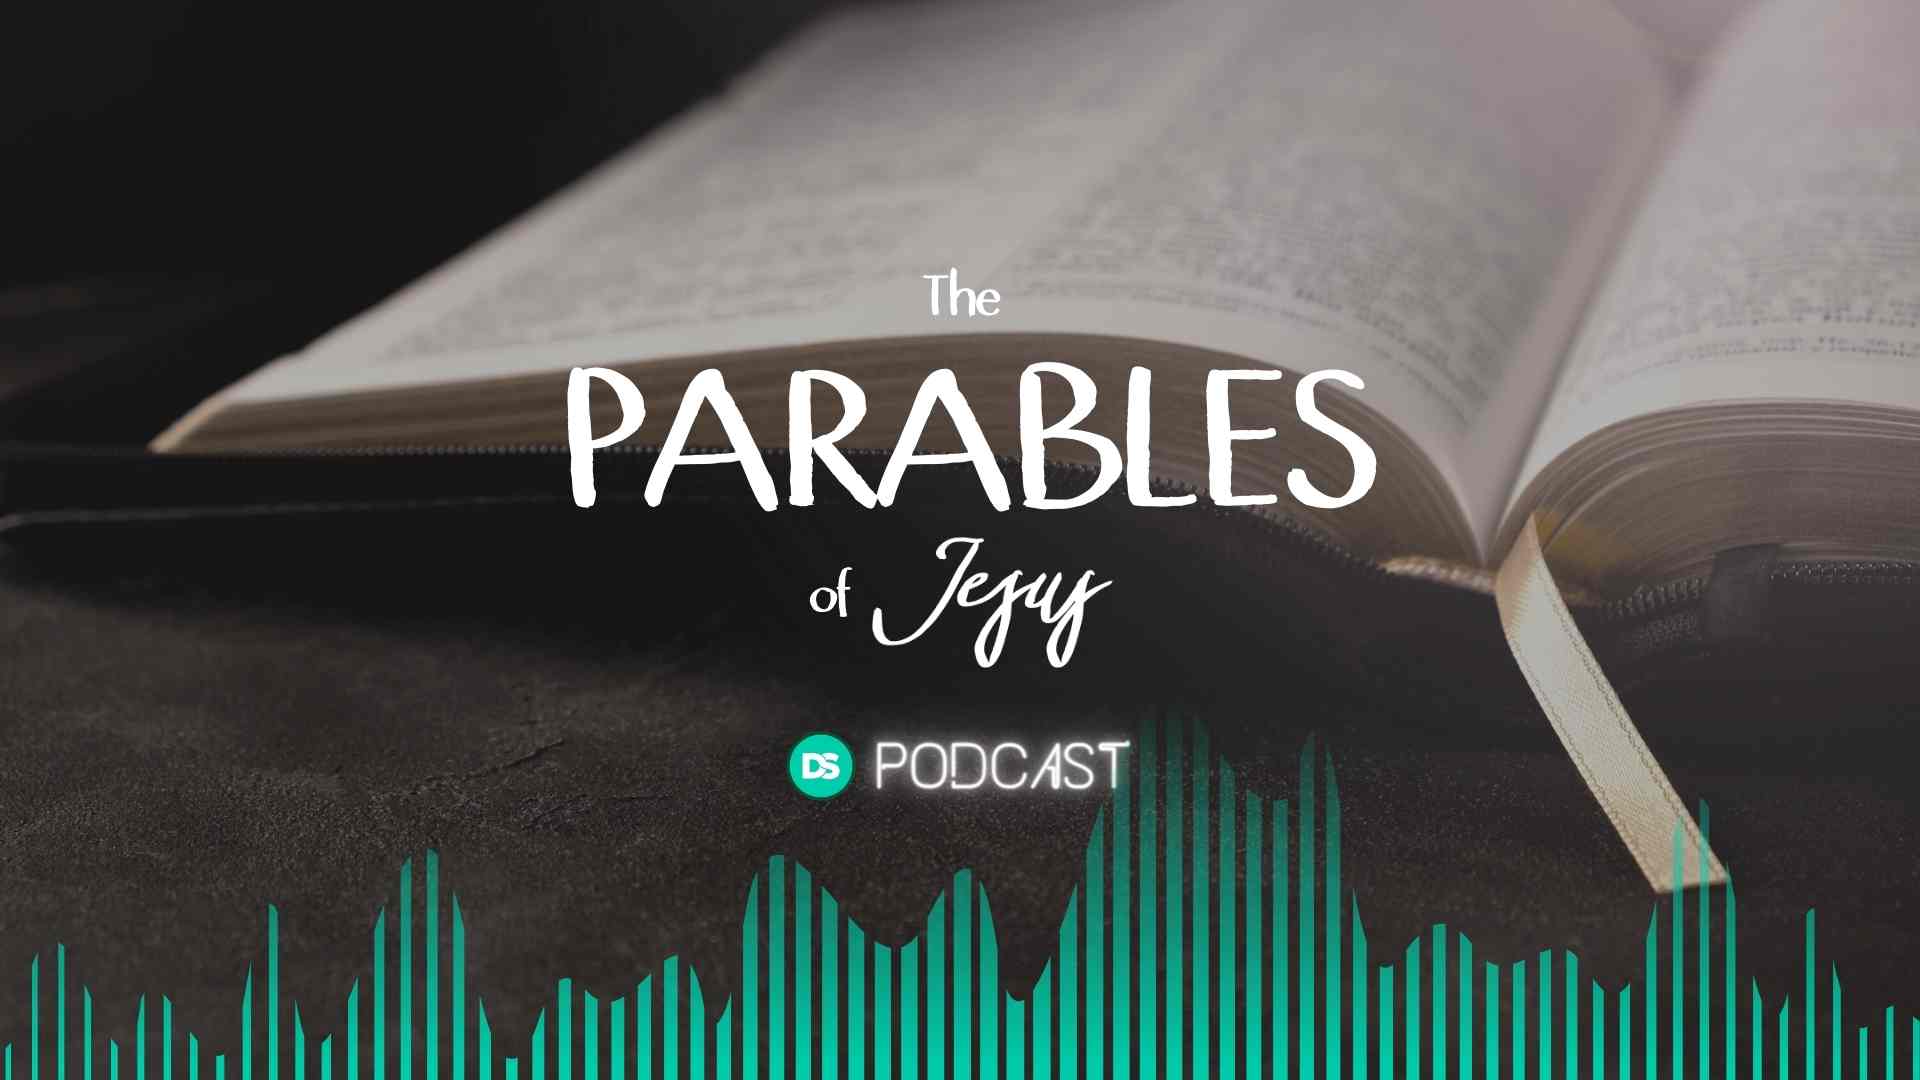 Introducing Our New Series on the Parables of Jesus 18